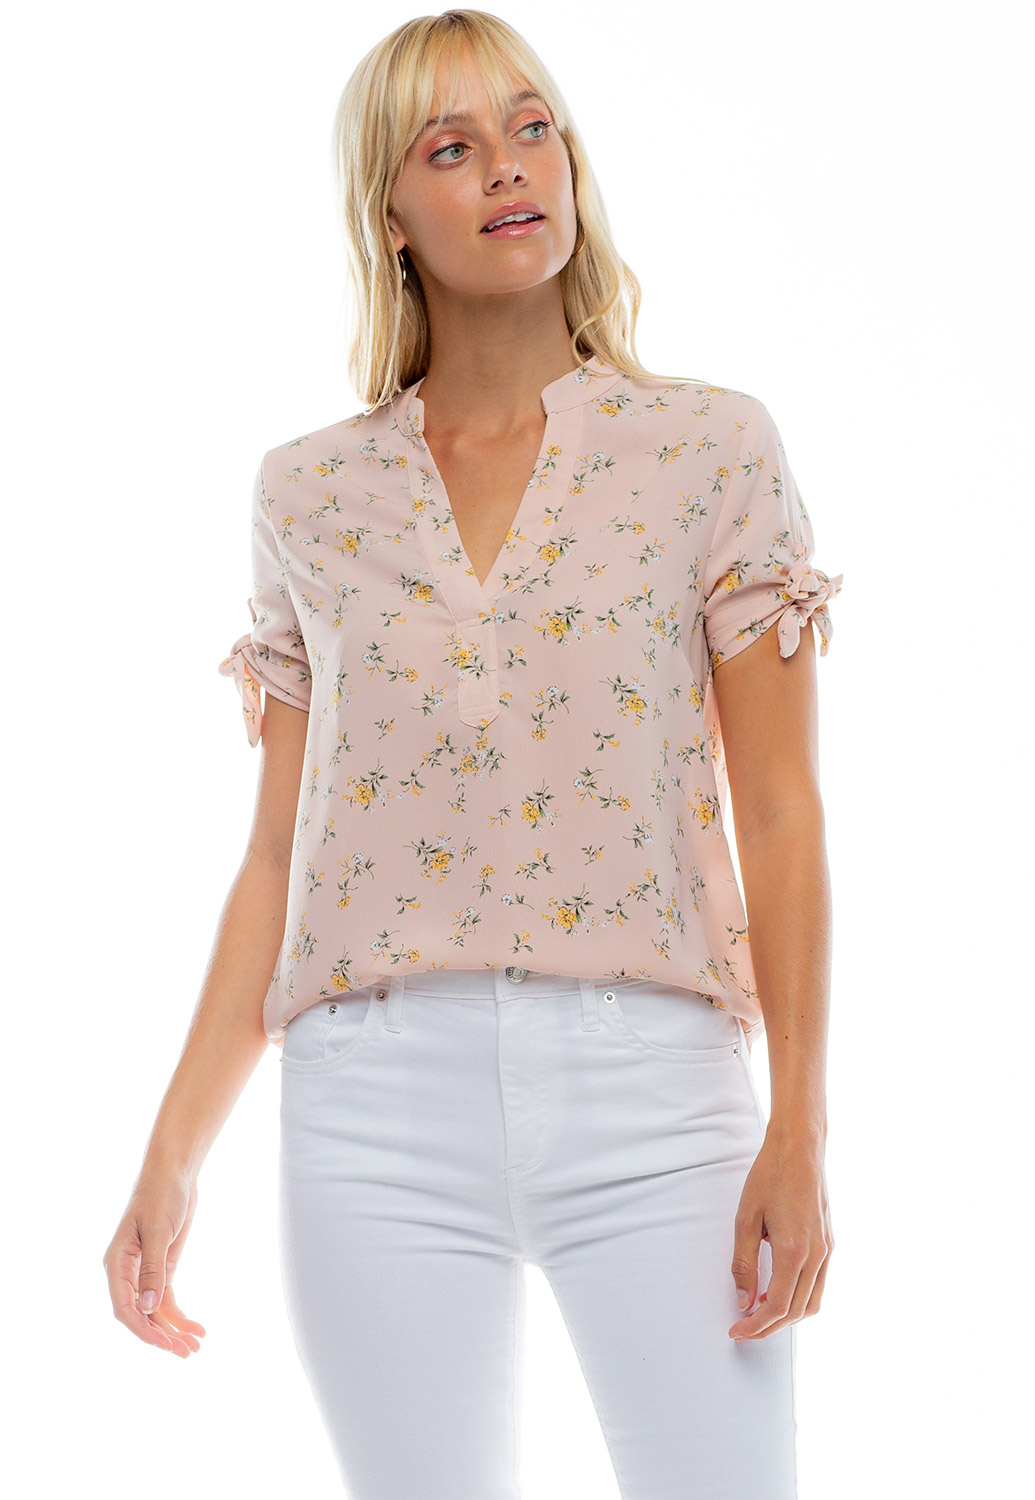 V-Neck Floral Blouse With Tie Sleeve Details